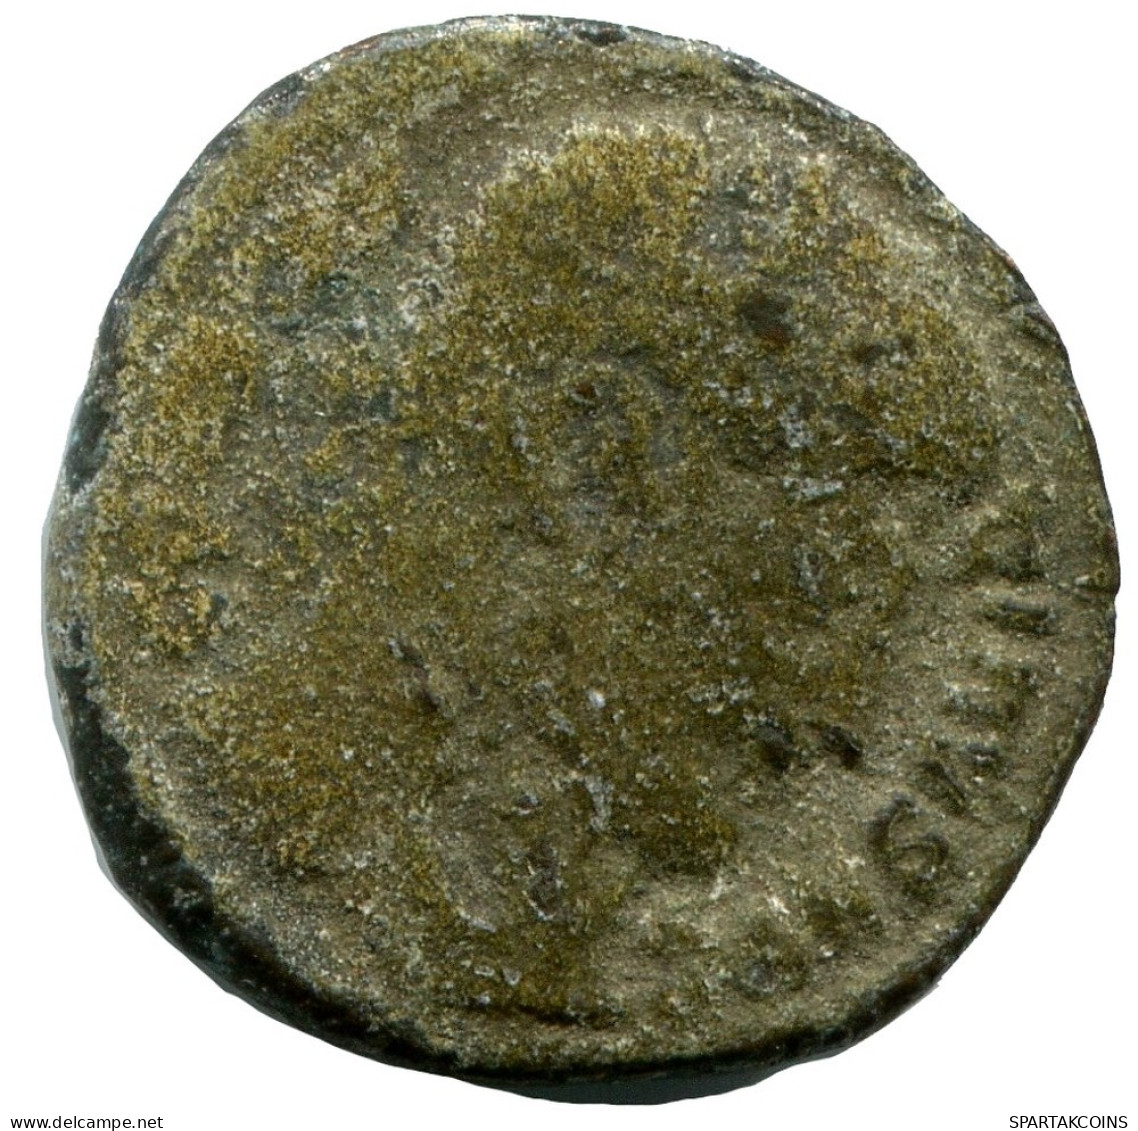 CONSTANTINE I MINTED IN ANTIOCH FROM THE ROYAL ONTARIO MUSEUM #ANC10676.14.U.A - L'Empire Chrétien (307 à 363)